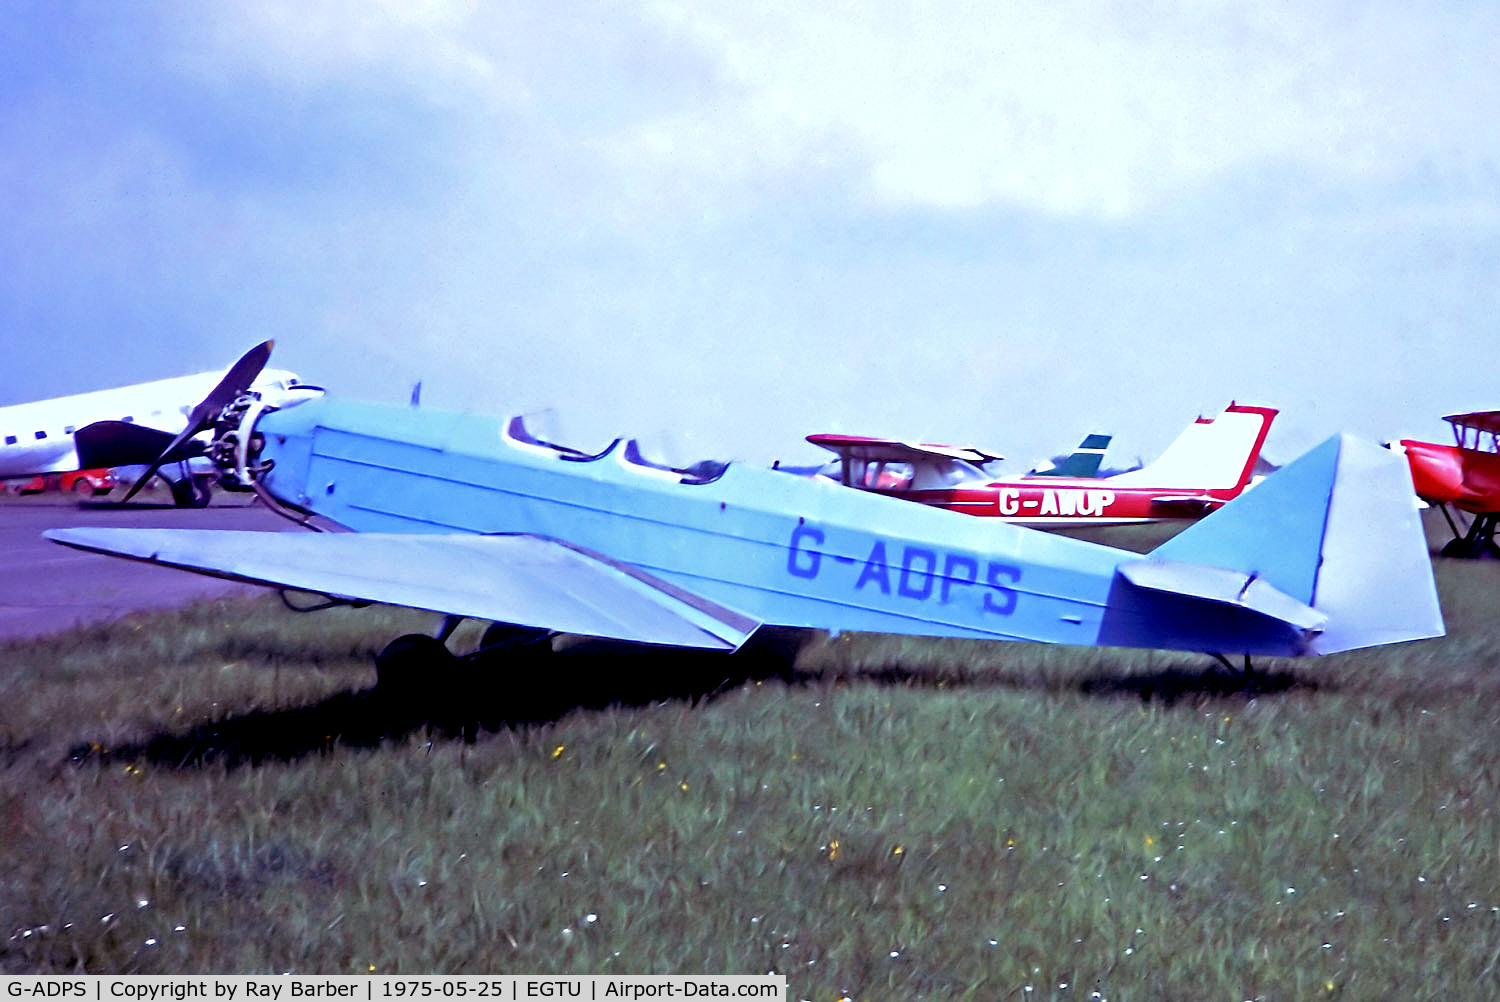 G-ADPS, 1935 British Aircraft Manufacturing Company Ltd SWALLOW 2 C/N 410, G-ADPS   B.A. Swallow II [410] Dunkeswell~G @ 25/05/1975